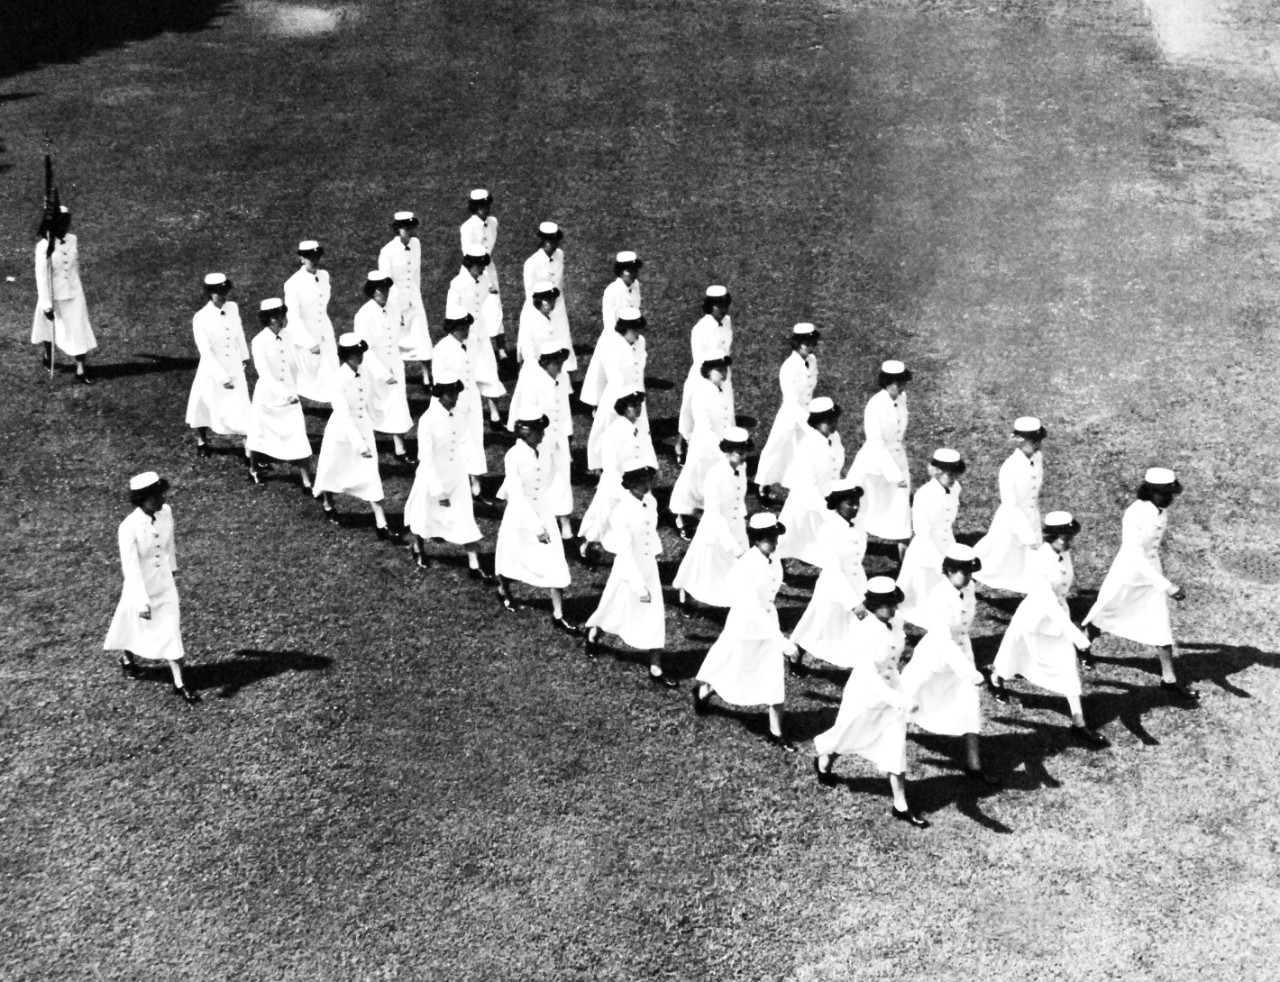 USN 708652:   Ten Years of the WAVY Blue, July 1952.   Drill Team.   The WAVES have been famous for their drill teams, one of which was recently featured in a movie.  The WAVE Drill Team of the Naval Training Center at Bainbridge, Maryland, sticks out as they begin one of the many formations executed by the 34 WAVE Trainees.  This drill formation, like the formations used going to classes, help the nautically minded women volunteers to better understand the necessity for a smart trim unit needed to win the competitive honors awarded WAVE companies going through their “Boot Camp.”  Photograph released July 24, 1952.  Official U.S. Navy photograph, now in the collections of the National Archives.  